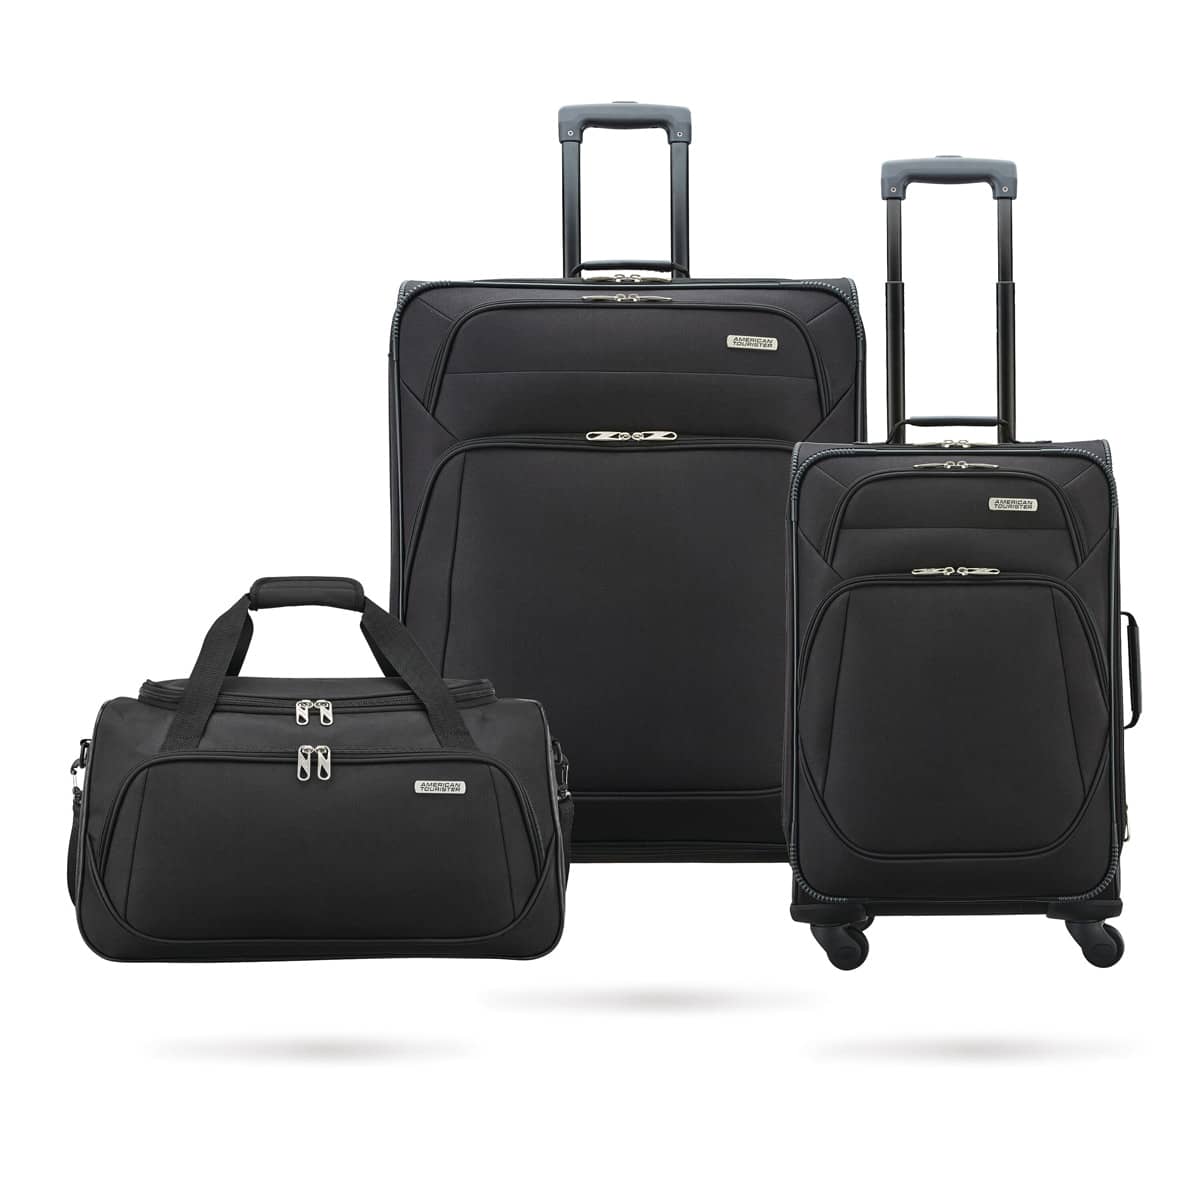 Luggage set with duffel